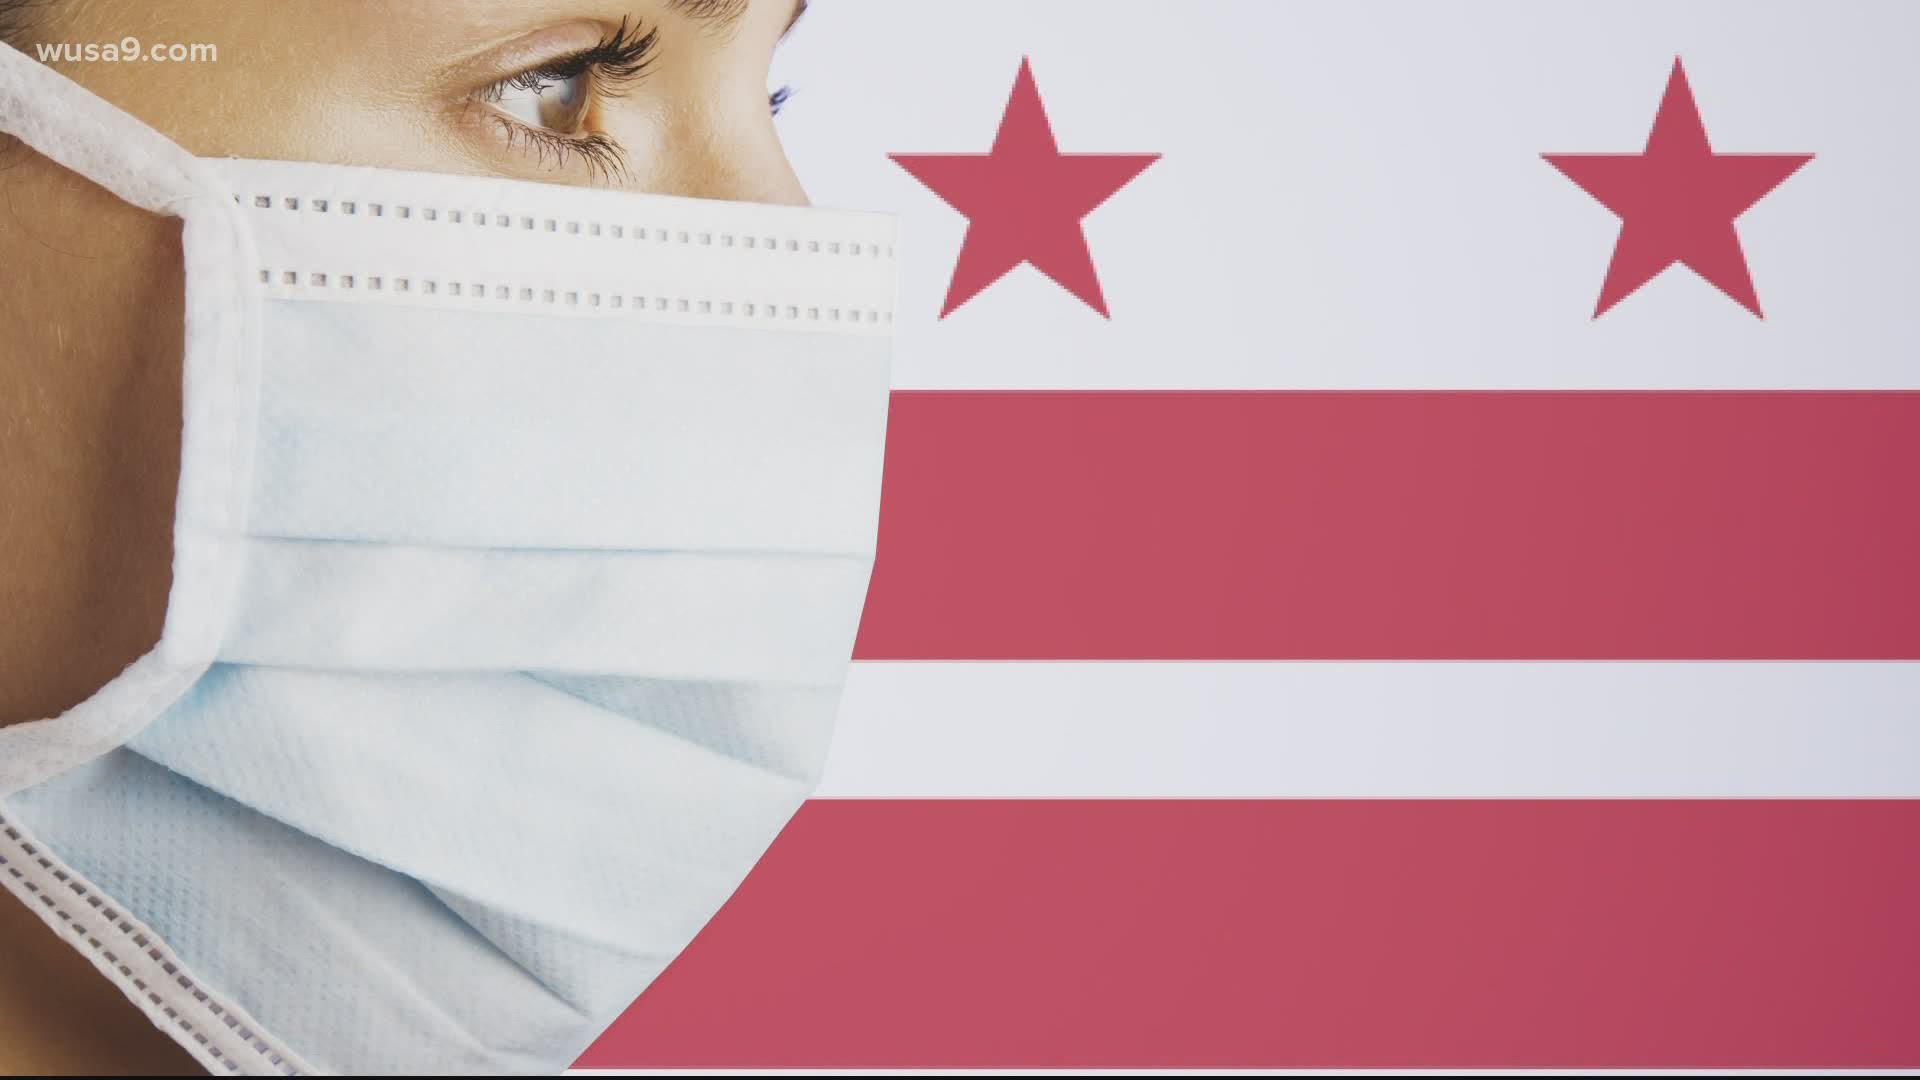 In Maryland, Virginia and the District, food service workers must wear a face mask.